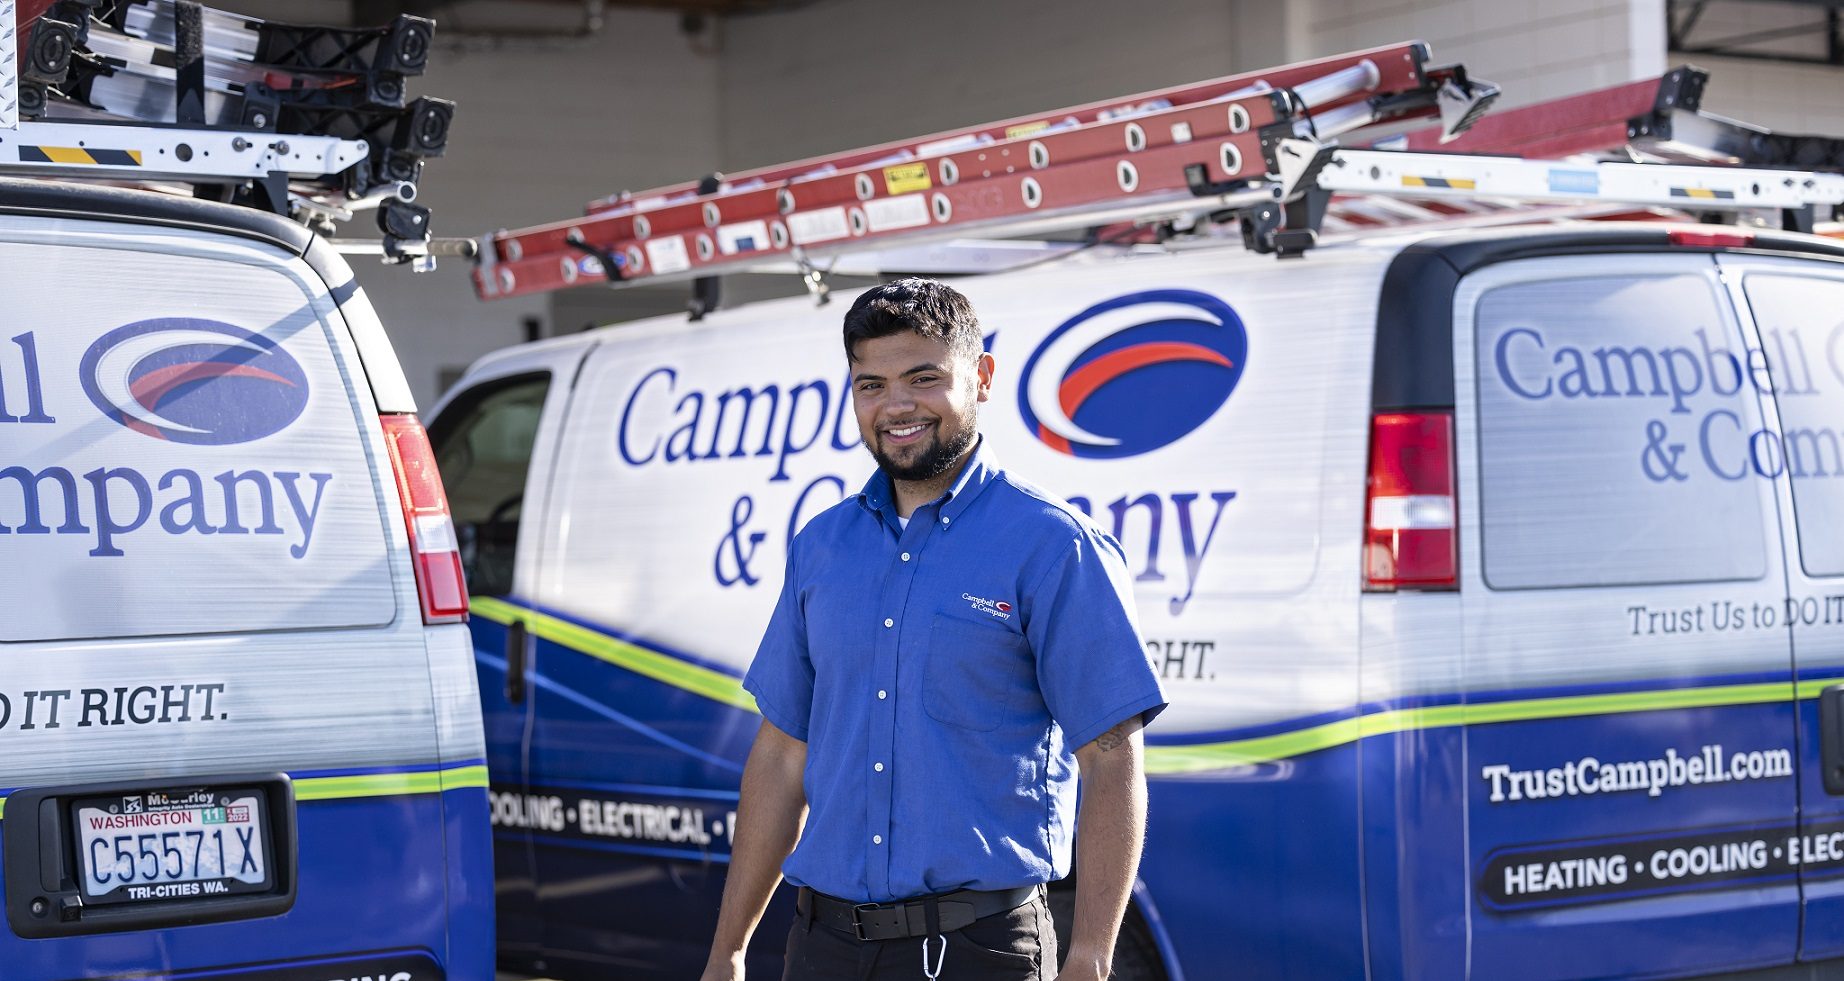 Campbell & Company hvac technician smiling in front of service van